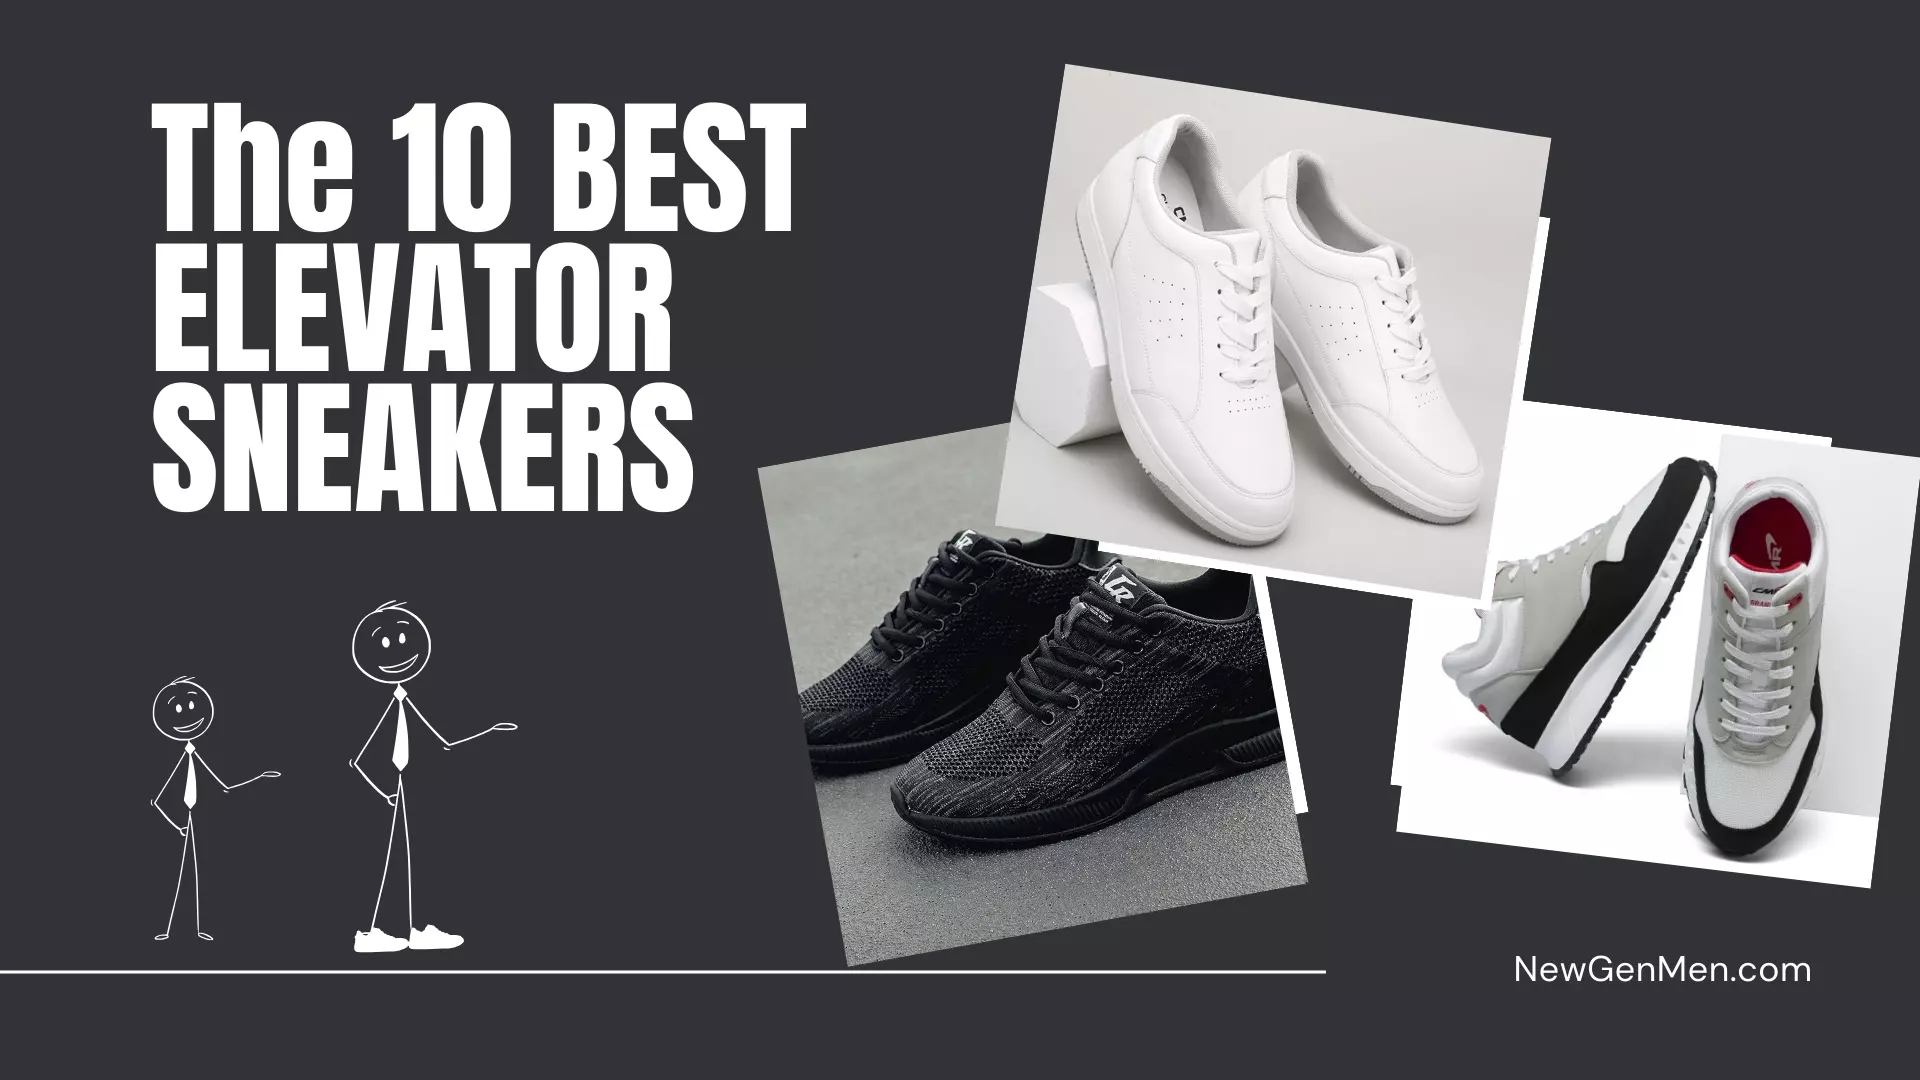 The 10 Best Discreet Sneakers That Make You Taller